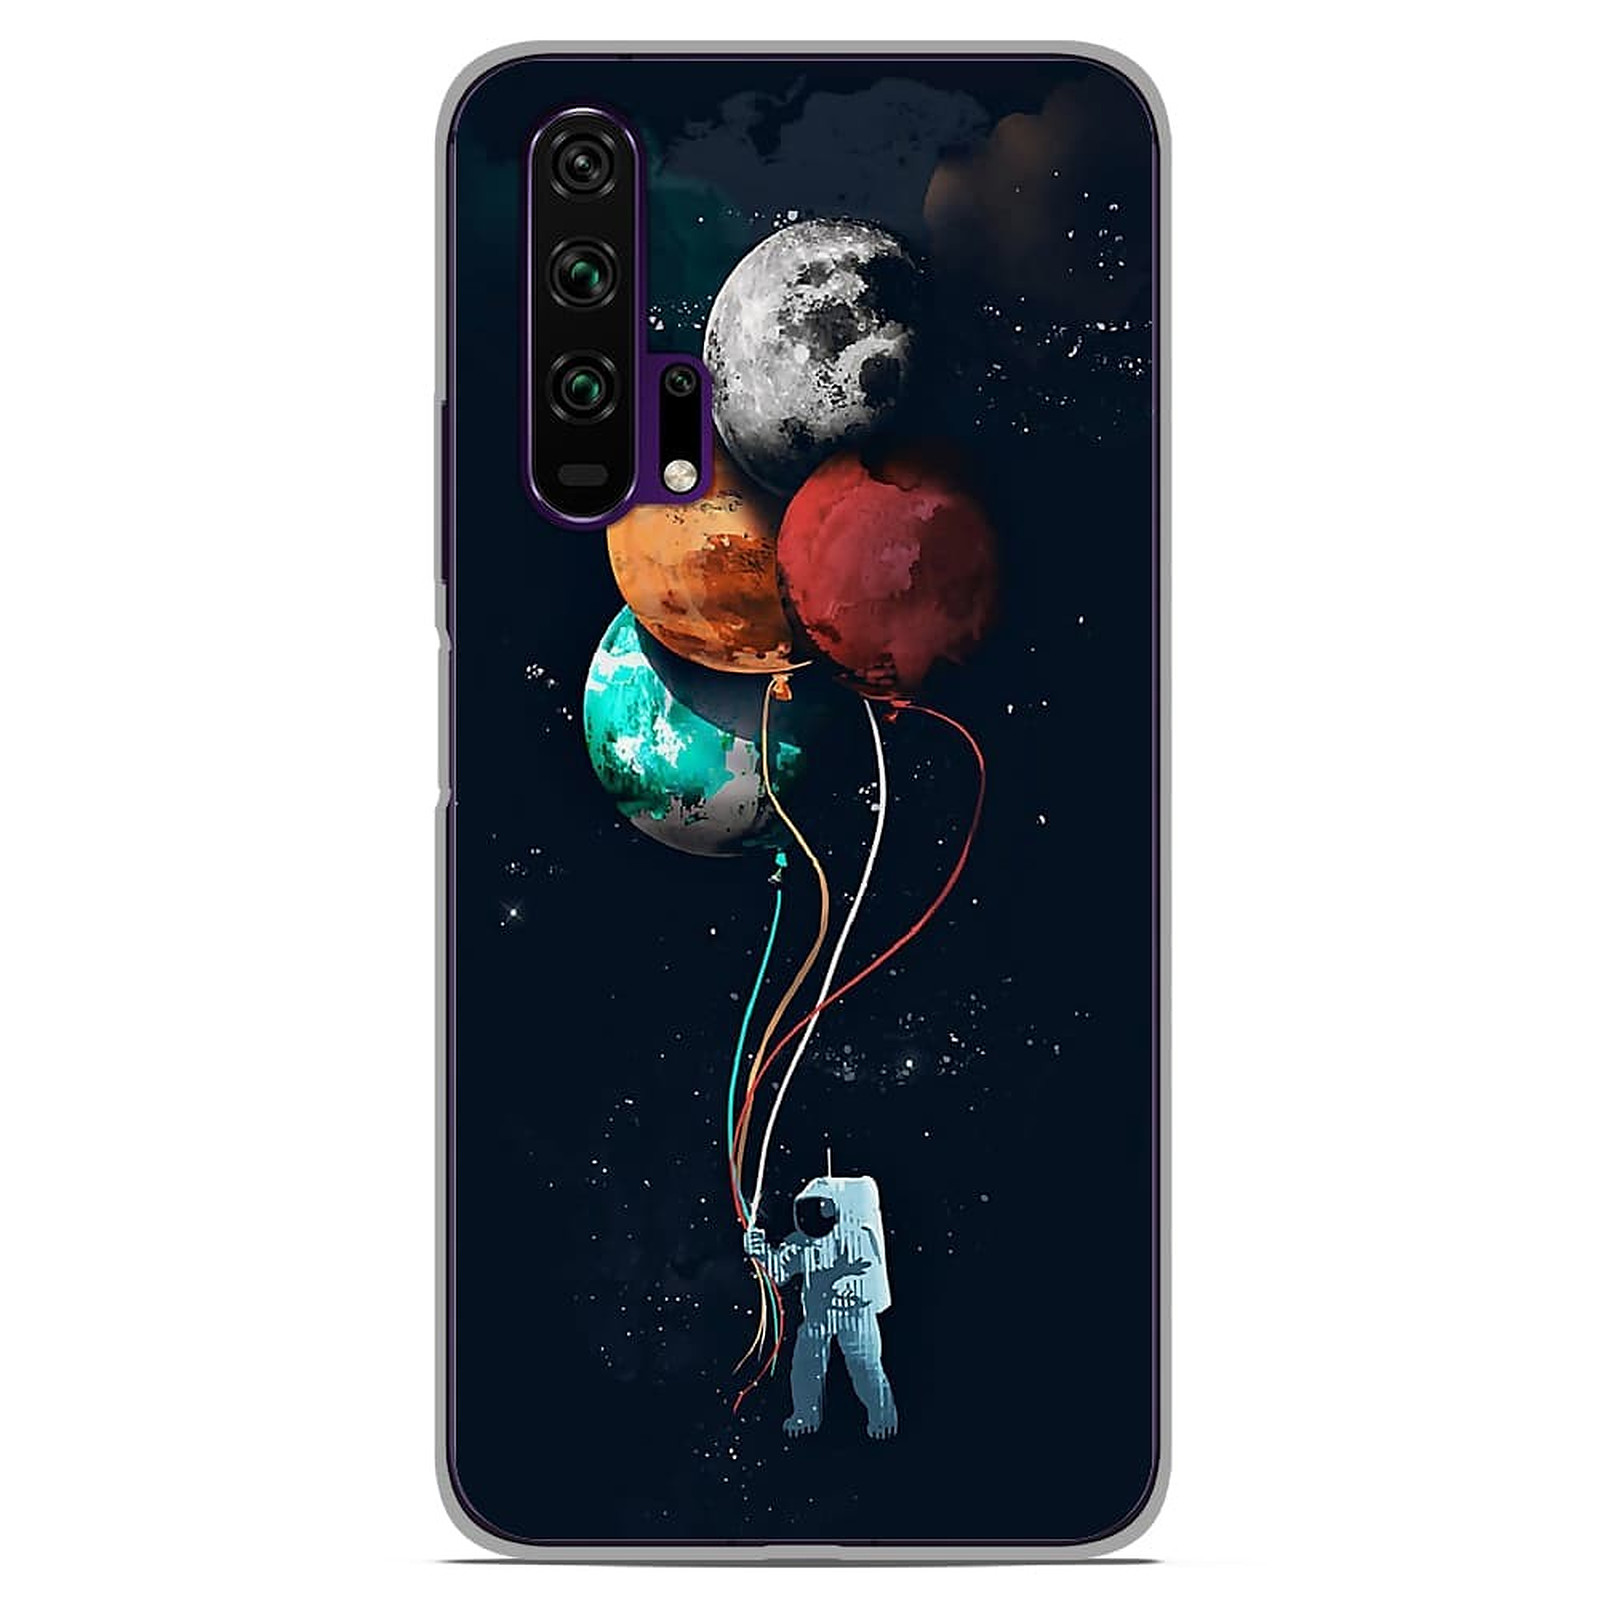 1001 Coques Coque silicone gel Huawei Honor 20 Pro motif Cosmonaute aux Ballons - Coque telephone 1001Coques